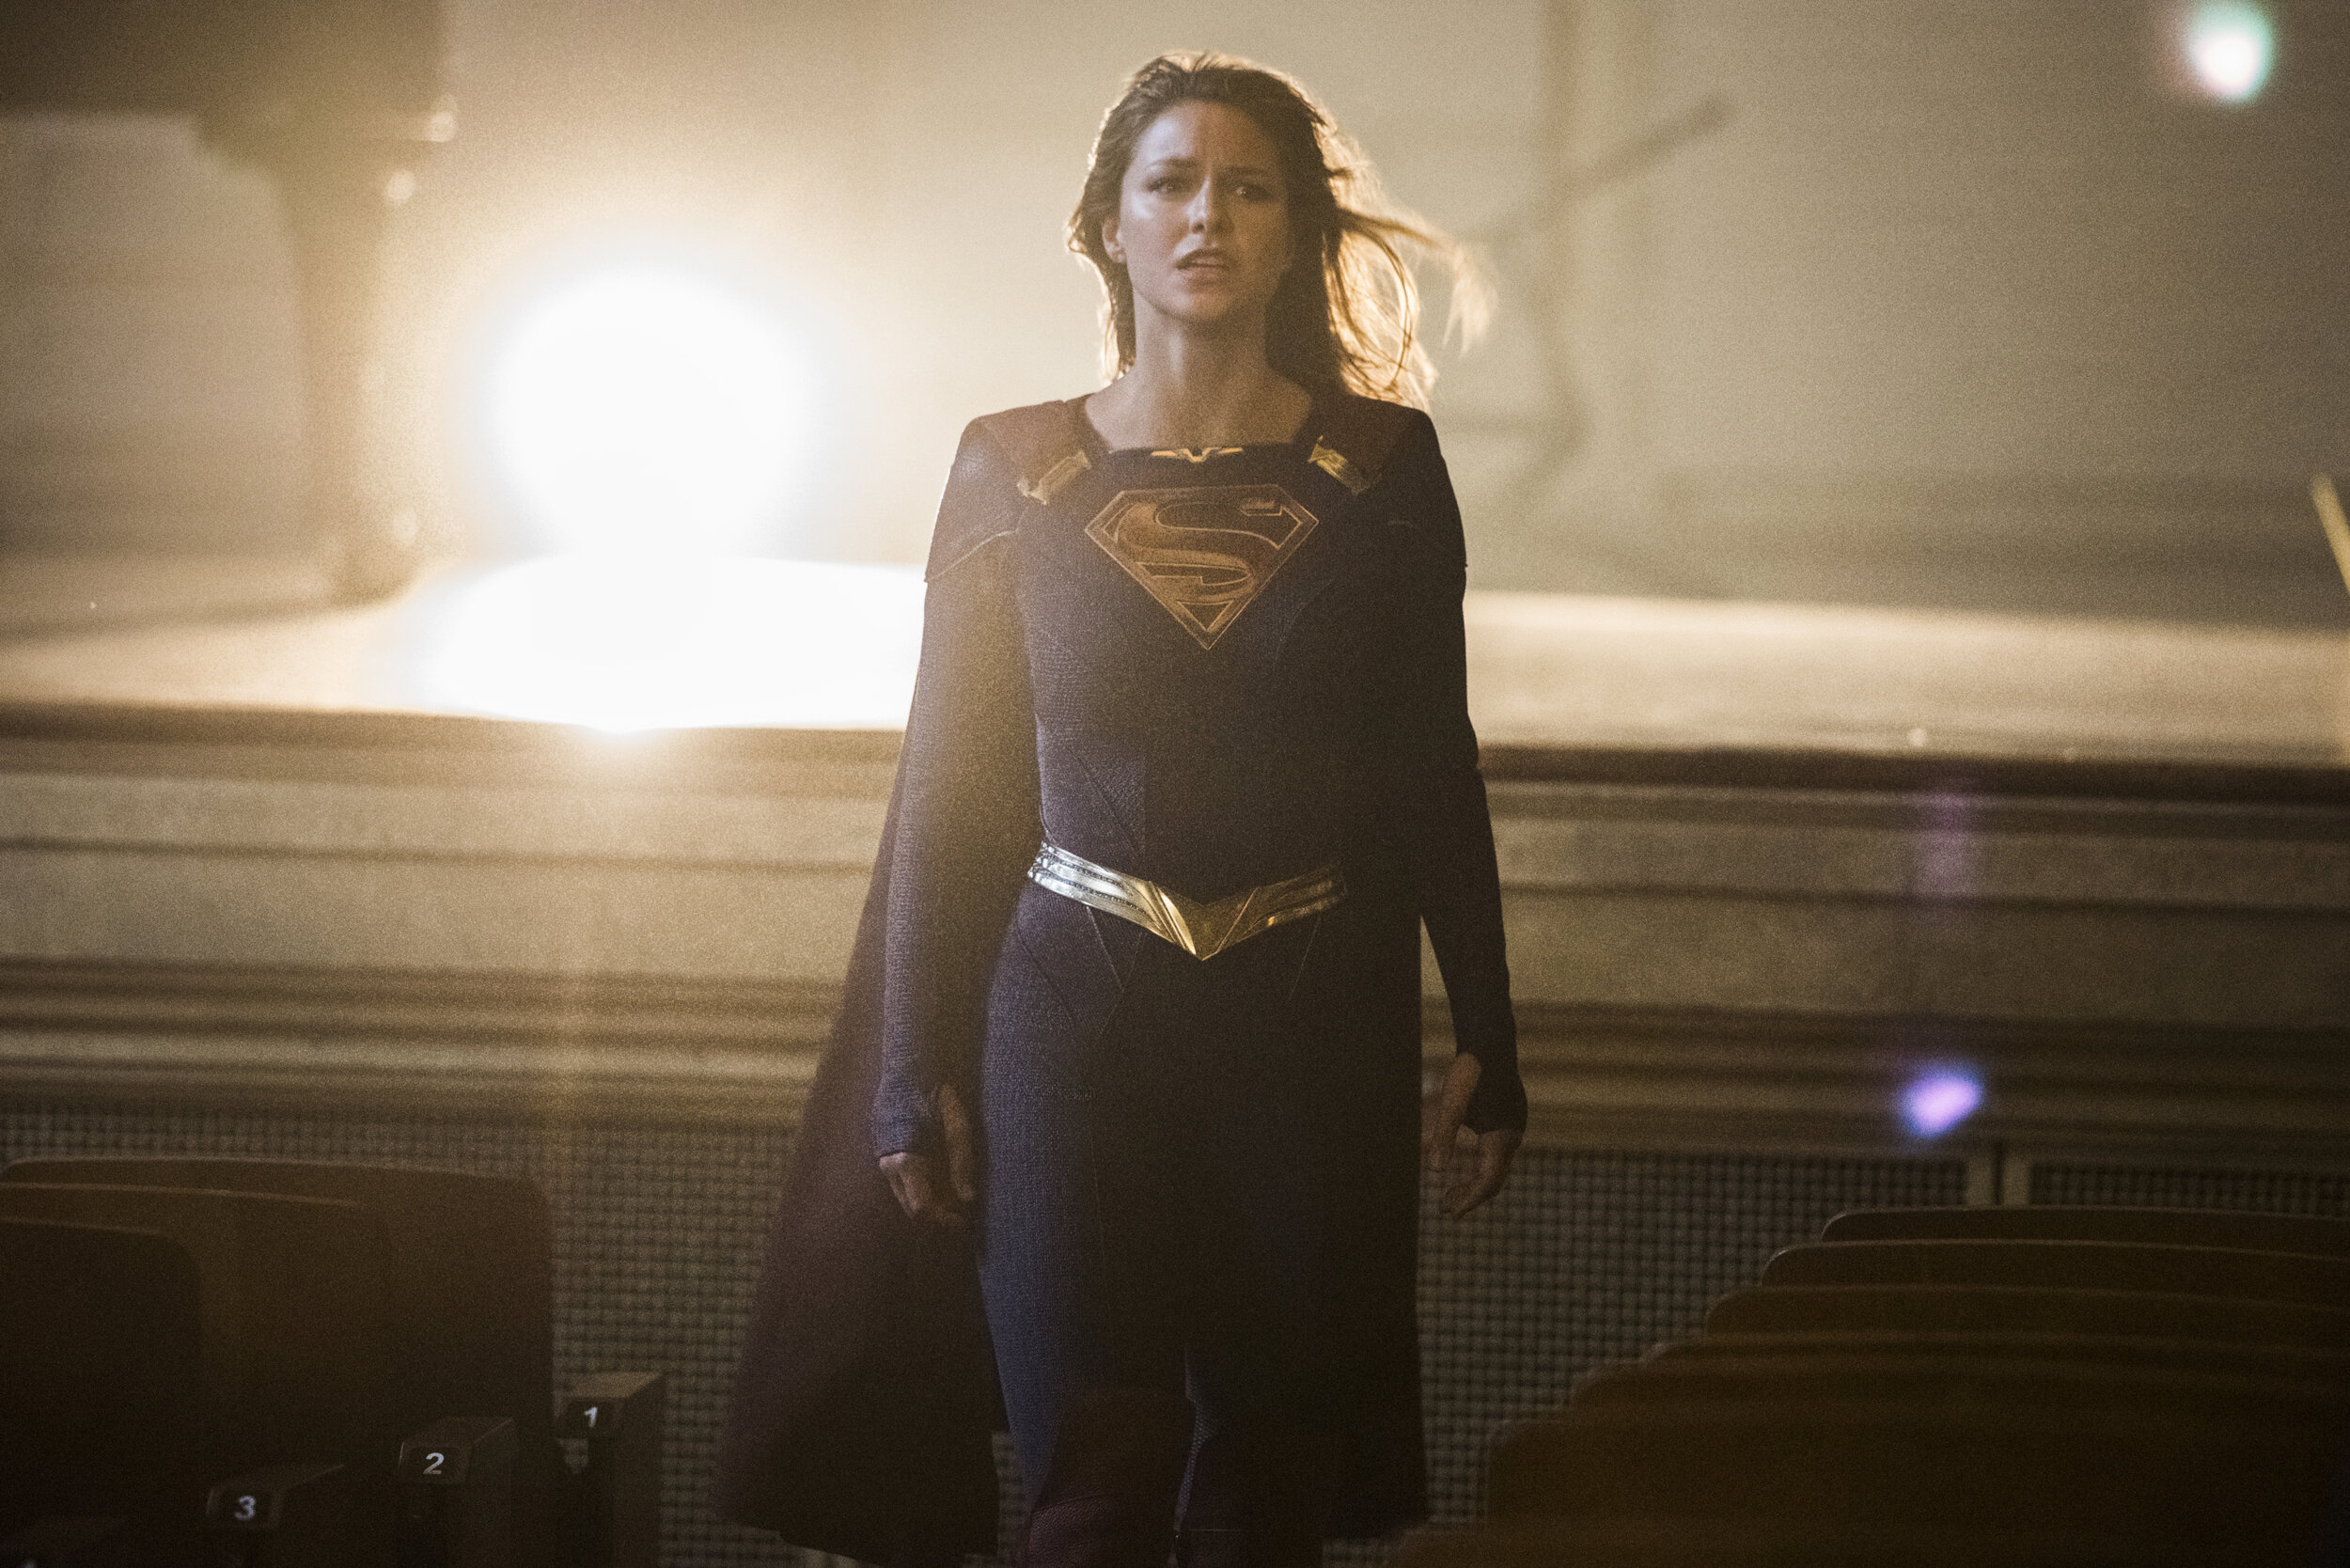 Still Photography for "Supergirl"